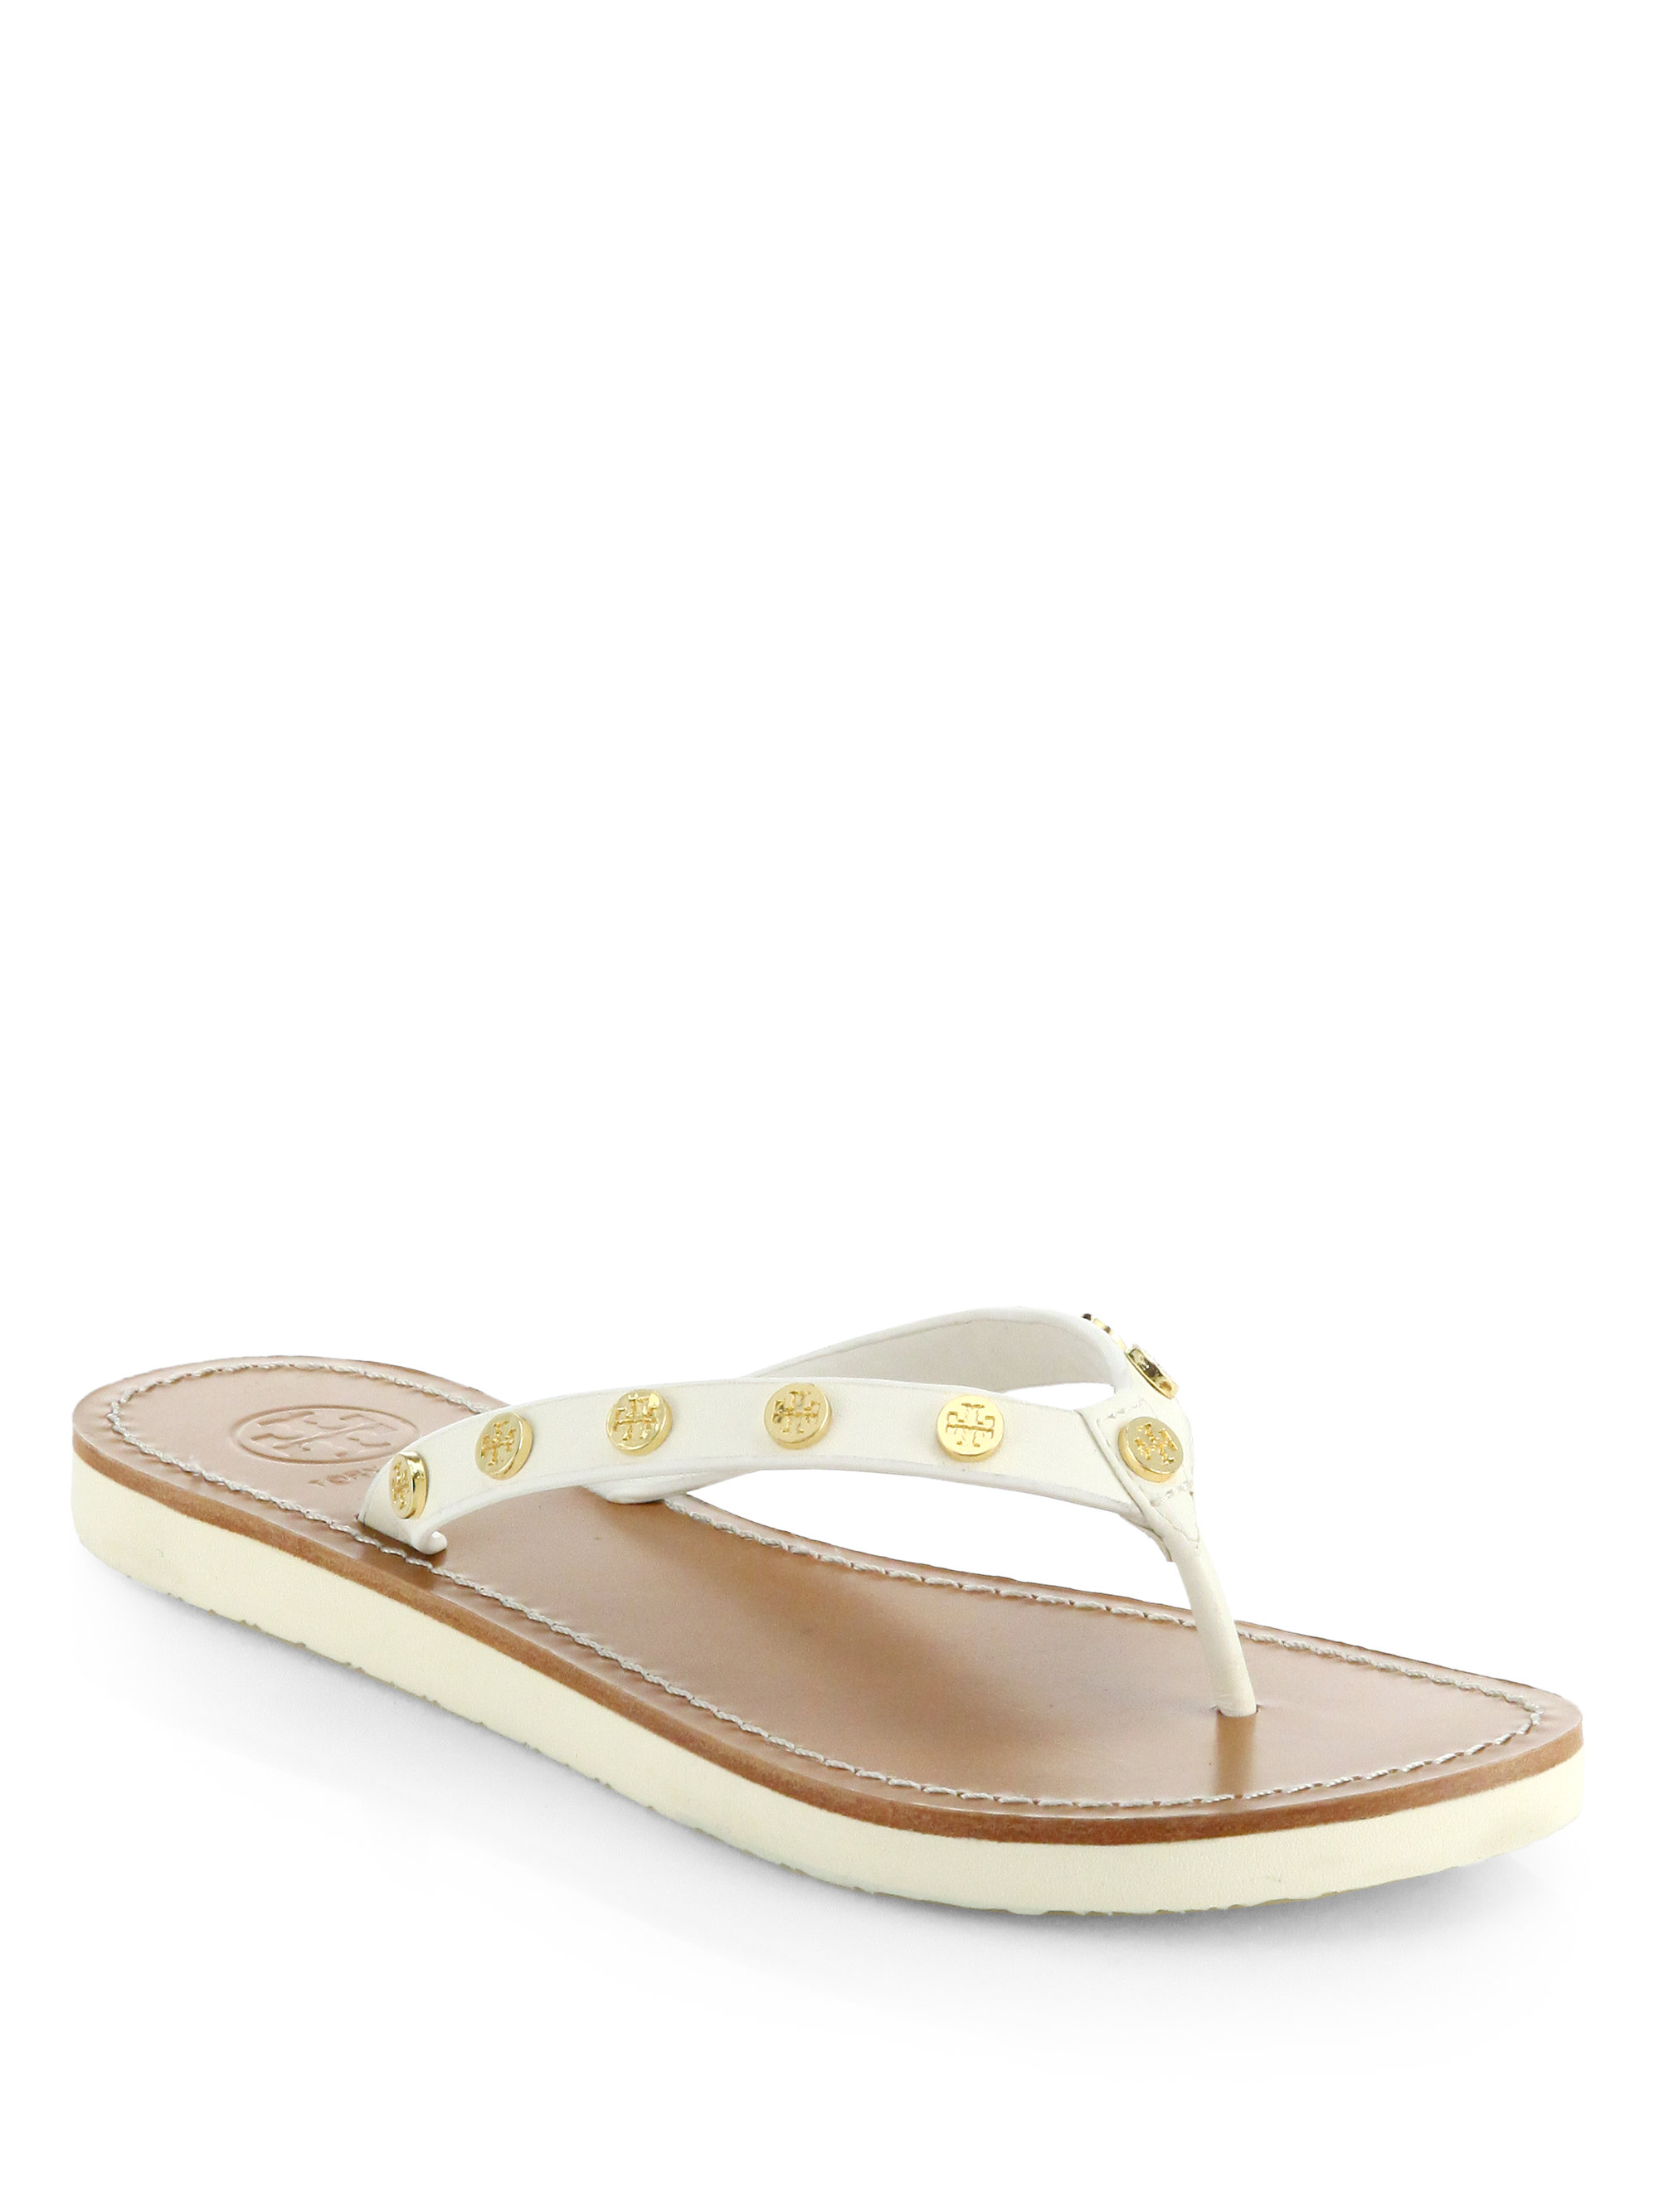 Tory Burch Ricki Studded Leather Thong Flip Flops in White | Lyst